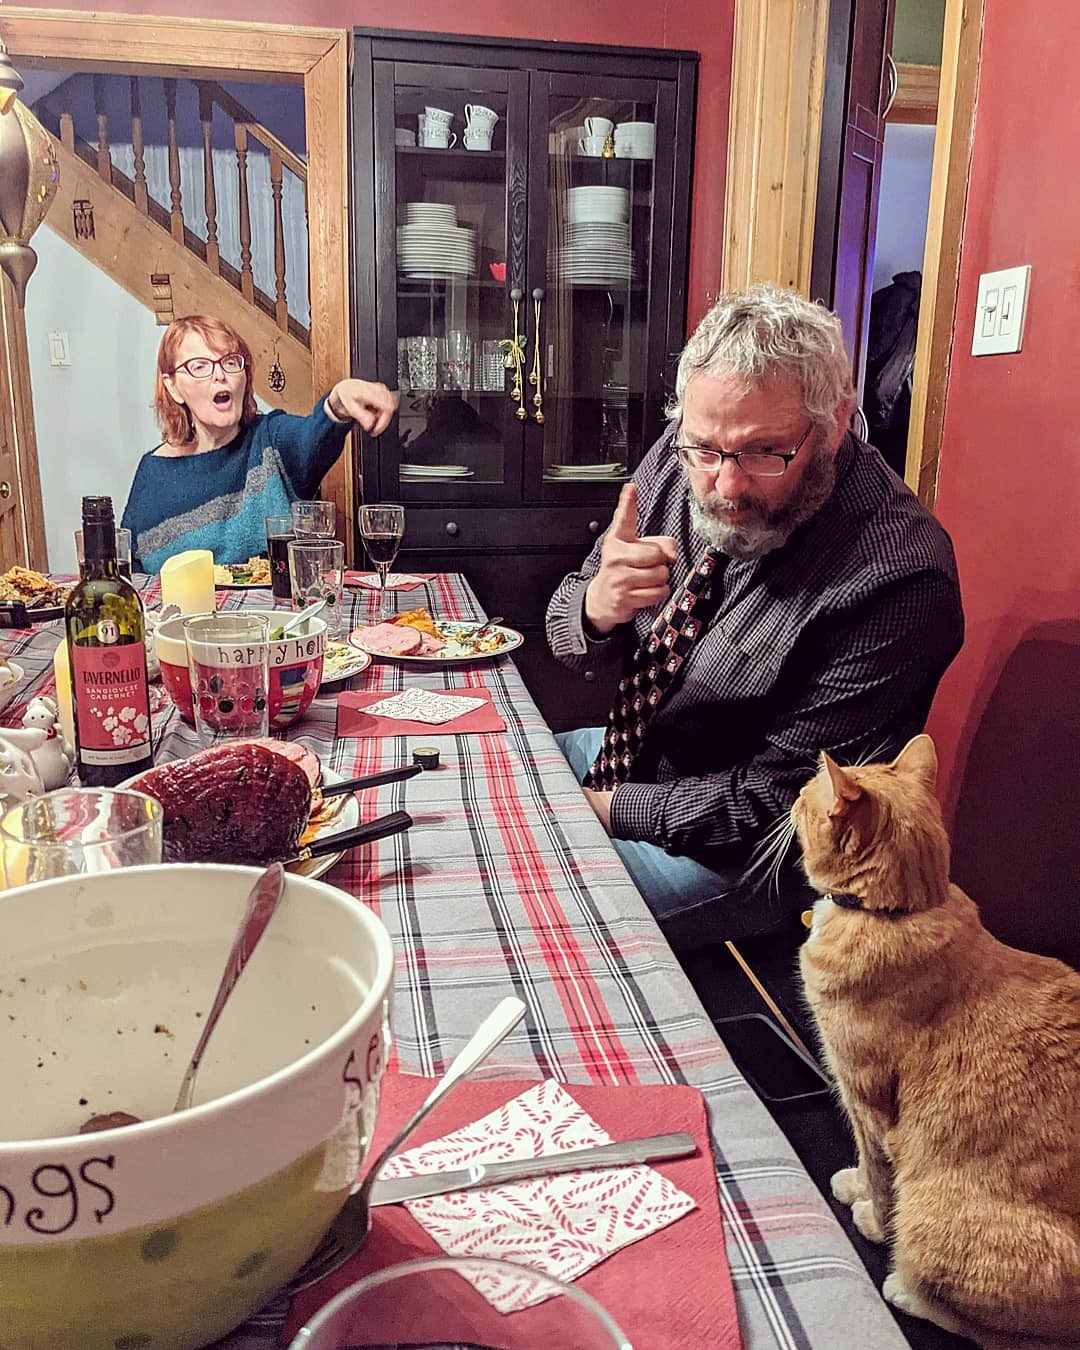 officialqueer:krawdad:officialqueer:officialqueer:This photo of my brother’s cat trying to jump on the dinner table at Christmas feels like a Normal Rockwell painting.He just wants to be included!!(He’s got an Insta btw).This is so funny,